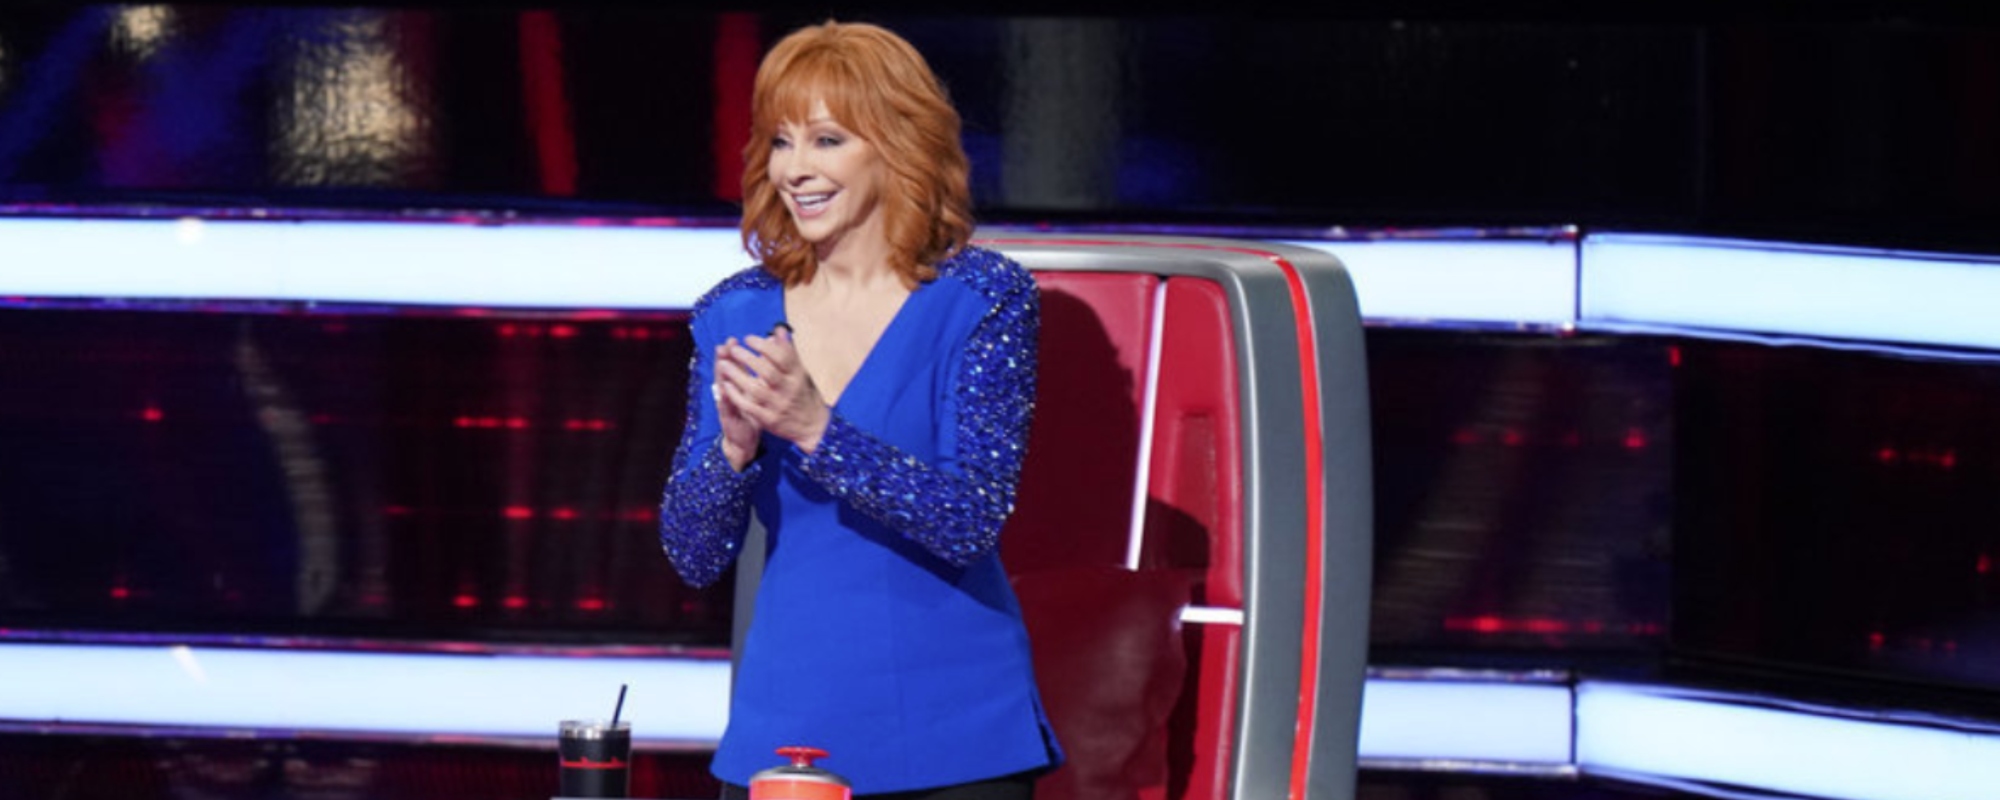 ‘The Voice’ Fans in an Uproar Over Reba McEntire’s Recent Battles Decision